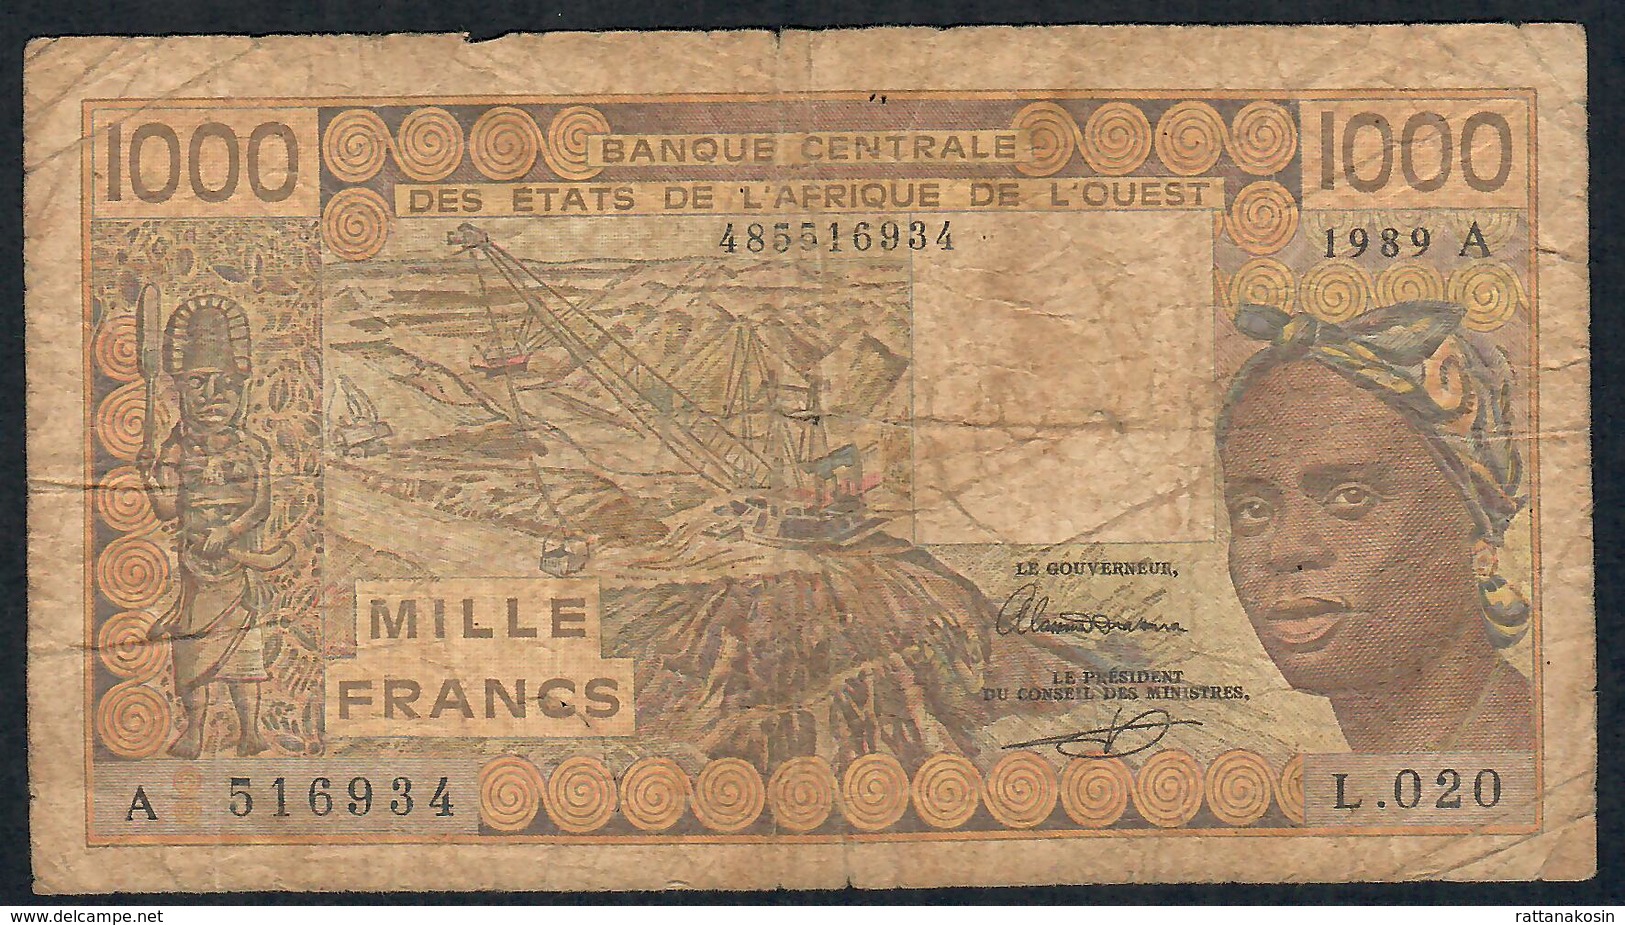 W.A.S. P107Ai  1000 FRANCS  1989 #L.020  VG-F - West African States